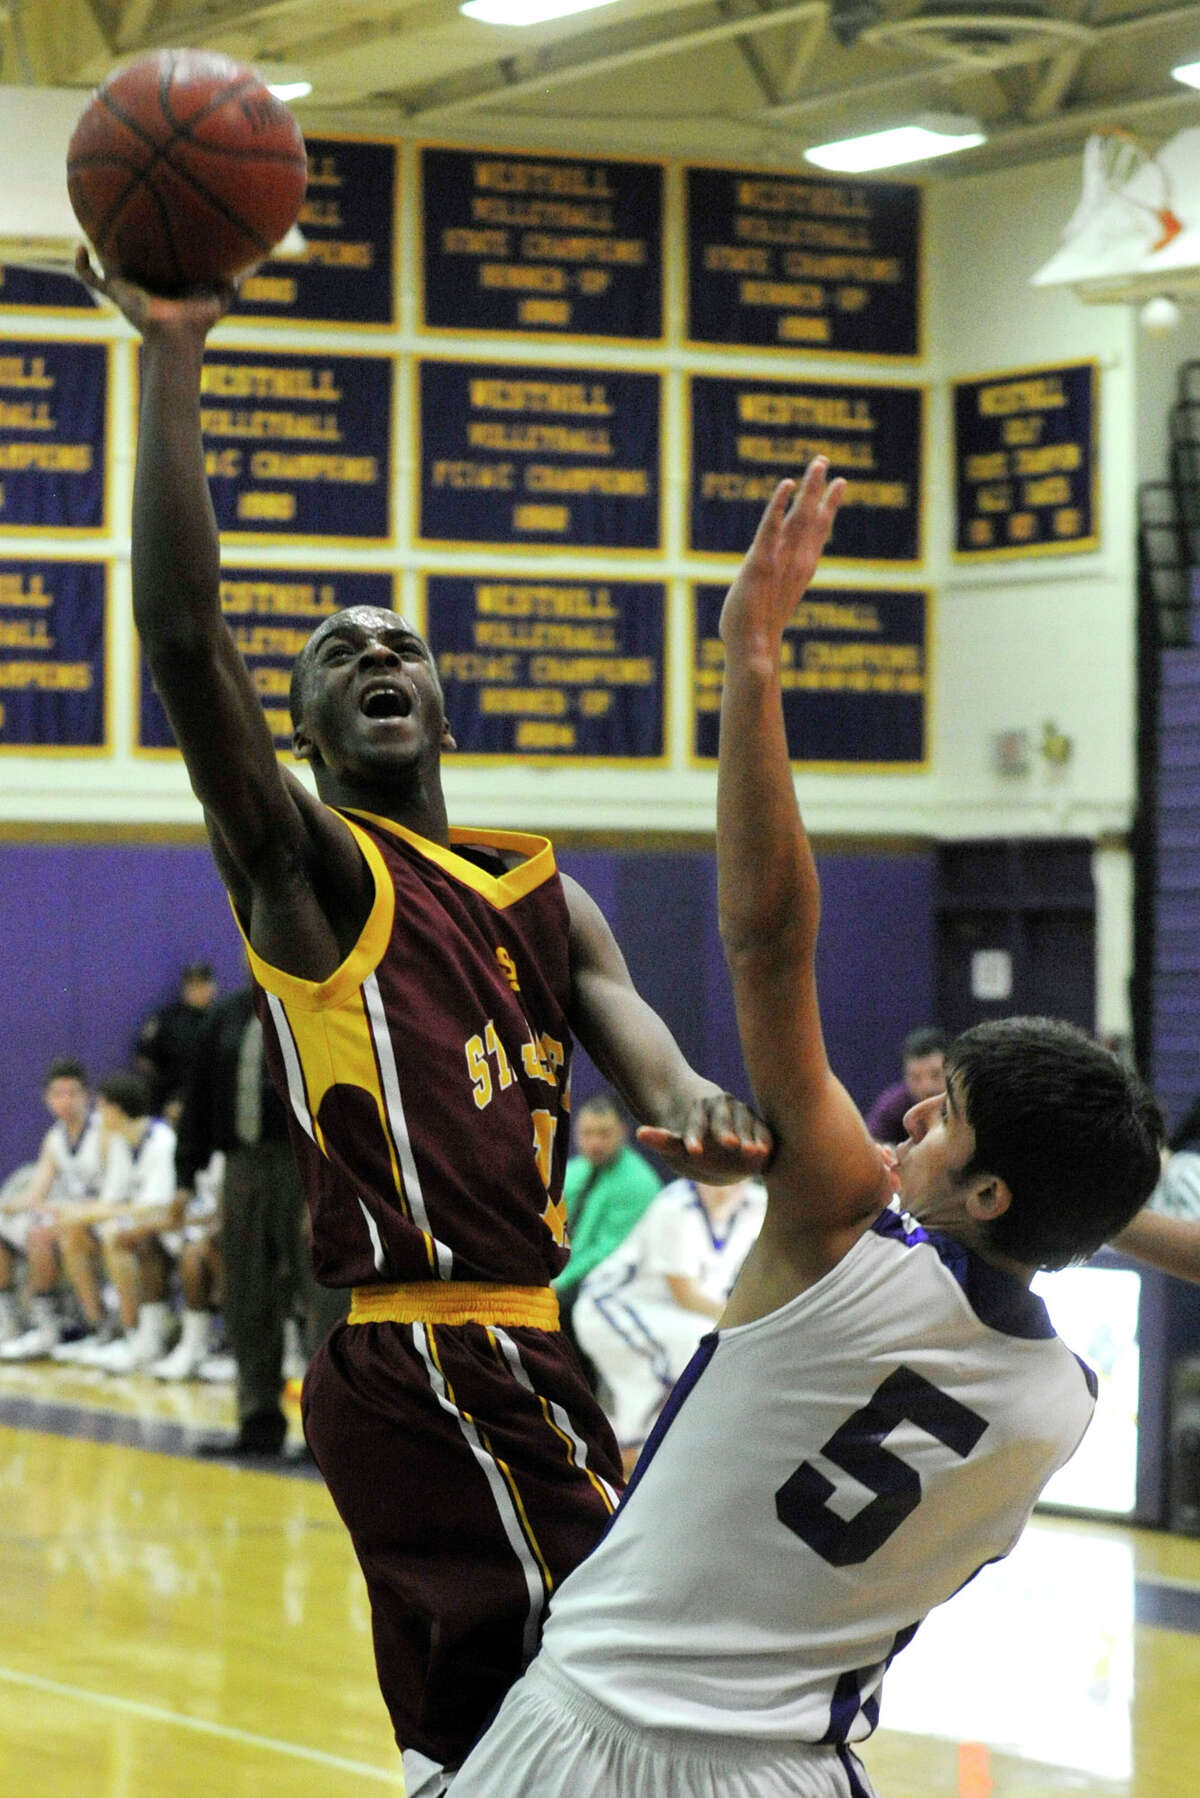 St. Joseph's Quincy McKnight shoots over Westhill's Evan Skoparantzas during their game at Westhill High School in Stamford on Monday, Feb. 18, 2013. St. Joseph won, 63-61.